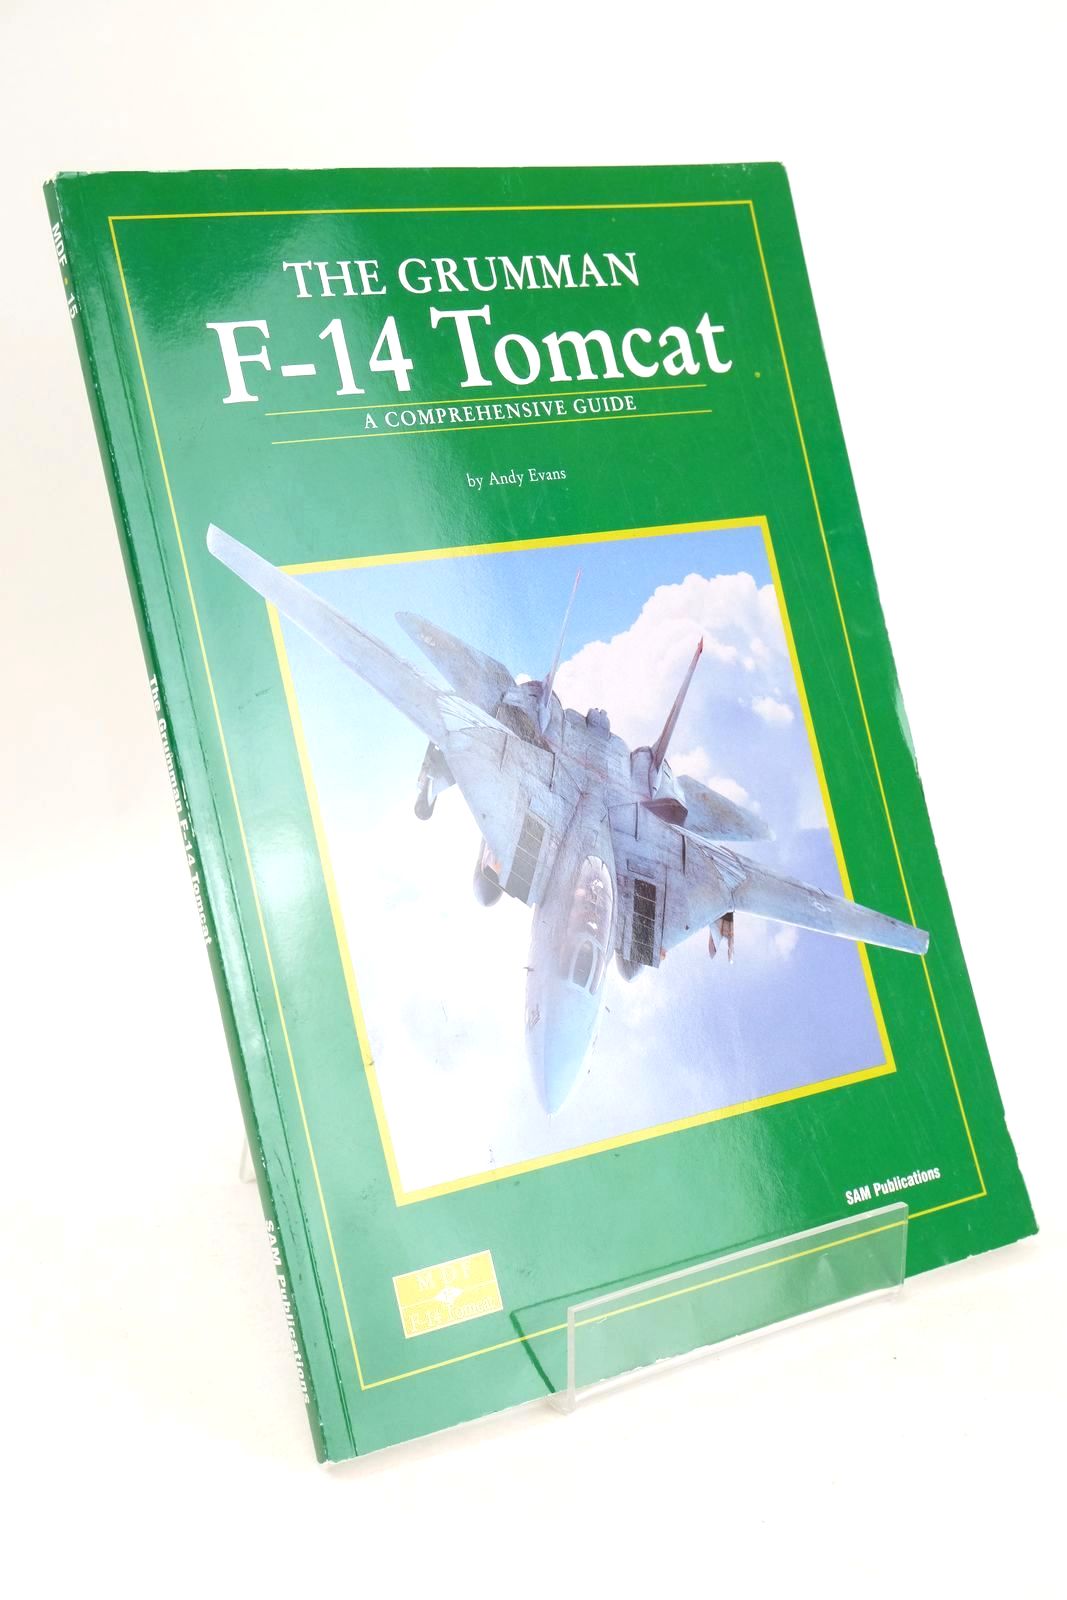 Photo of THE GRUMMAN F-14 TOMCAT: A COMPREHENSIVE GUIDE written by Evans, Andy published by SAM Publications (STOCK CODE: 1326012)  for sale by Stella & Rose's Books